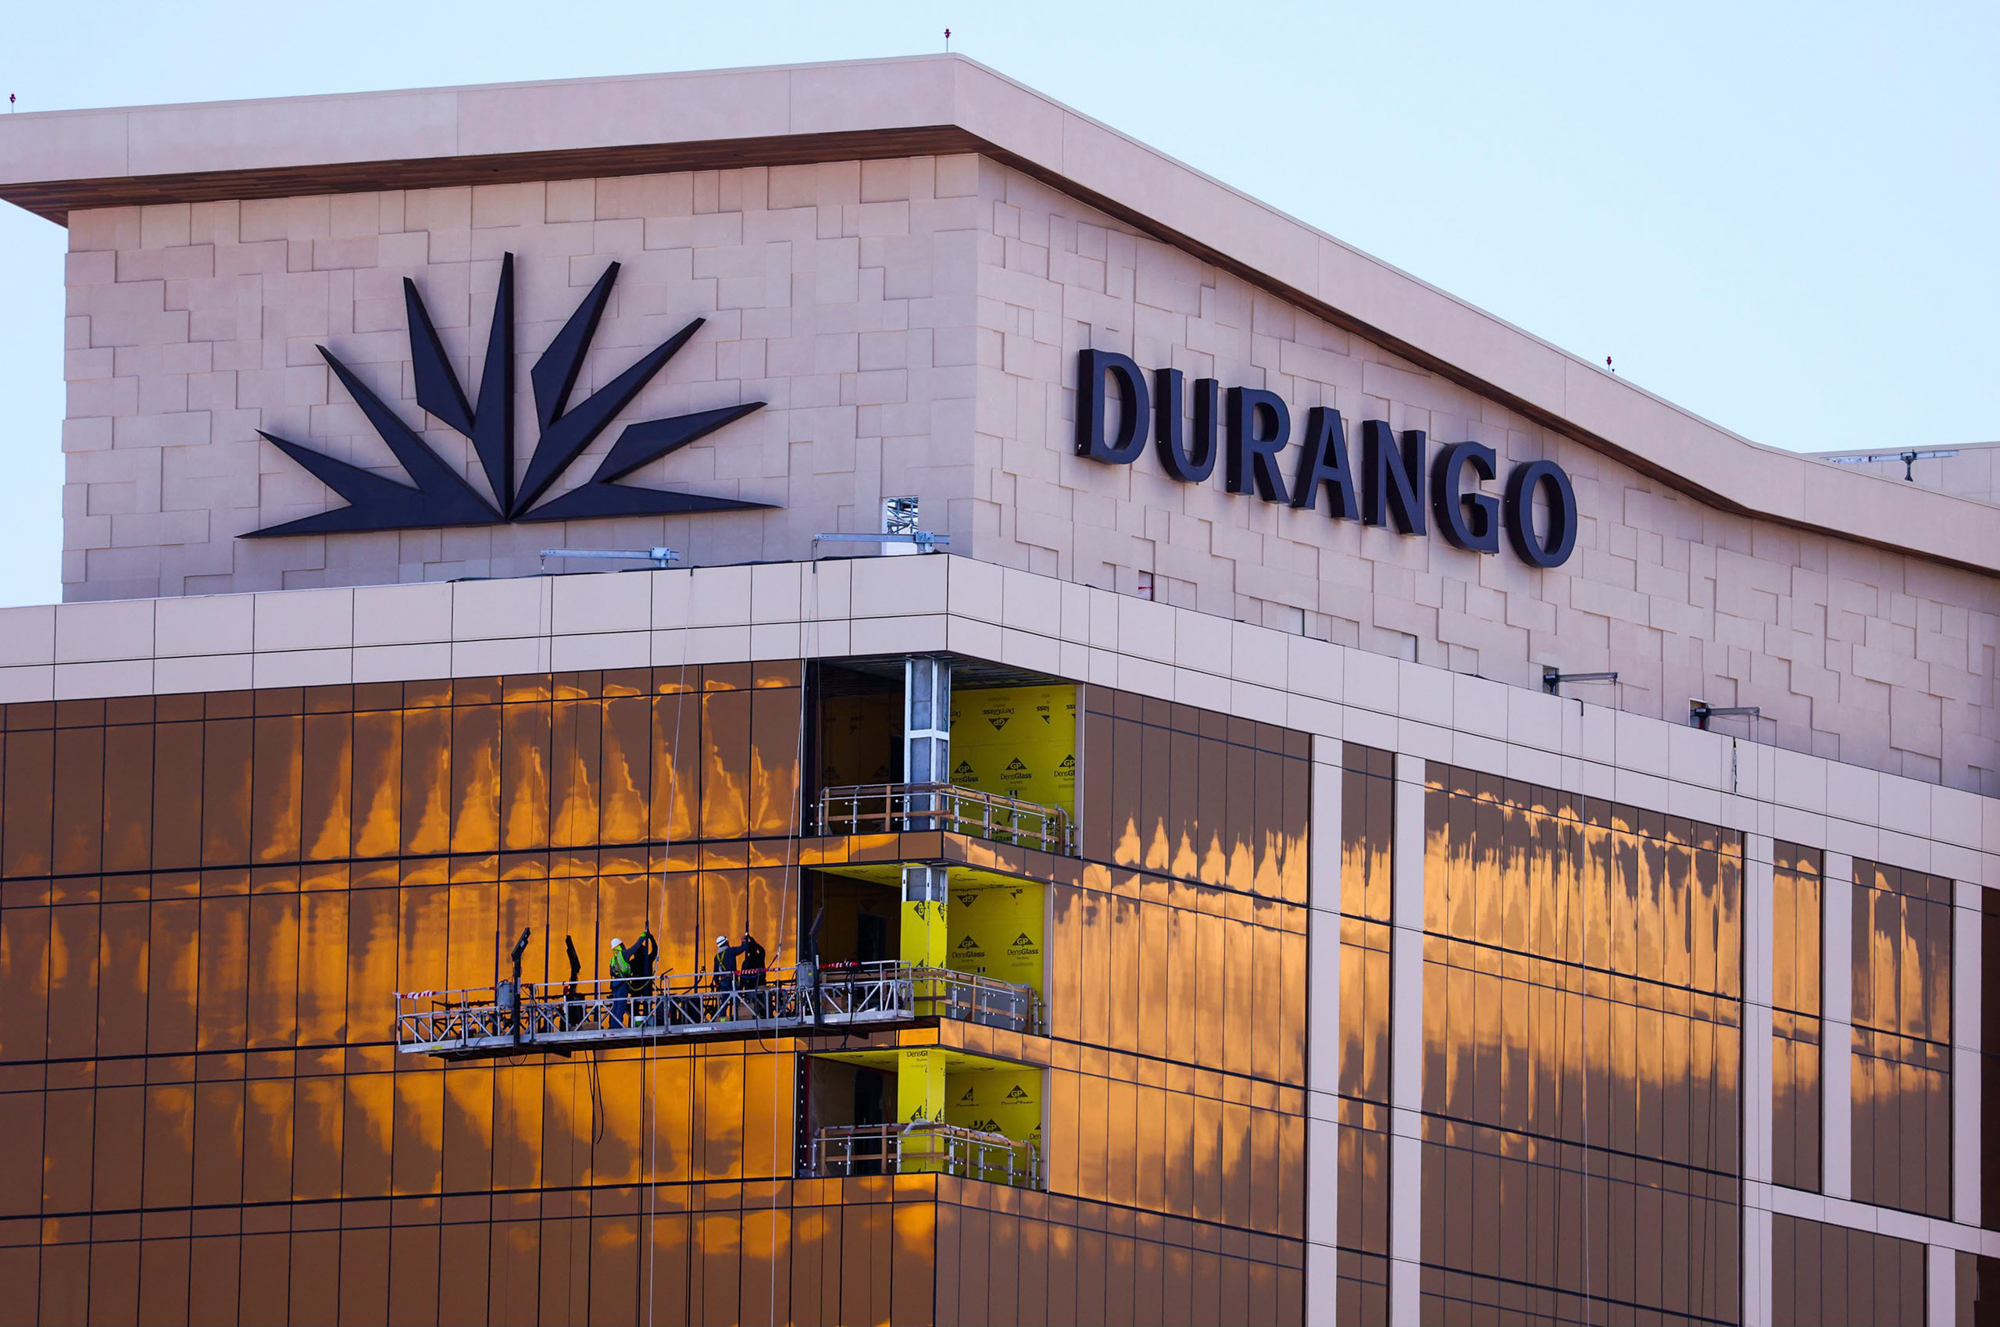 Station Casinos' new Durango casino and resort plans to open in